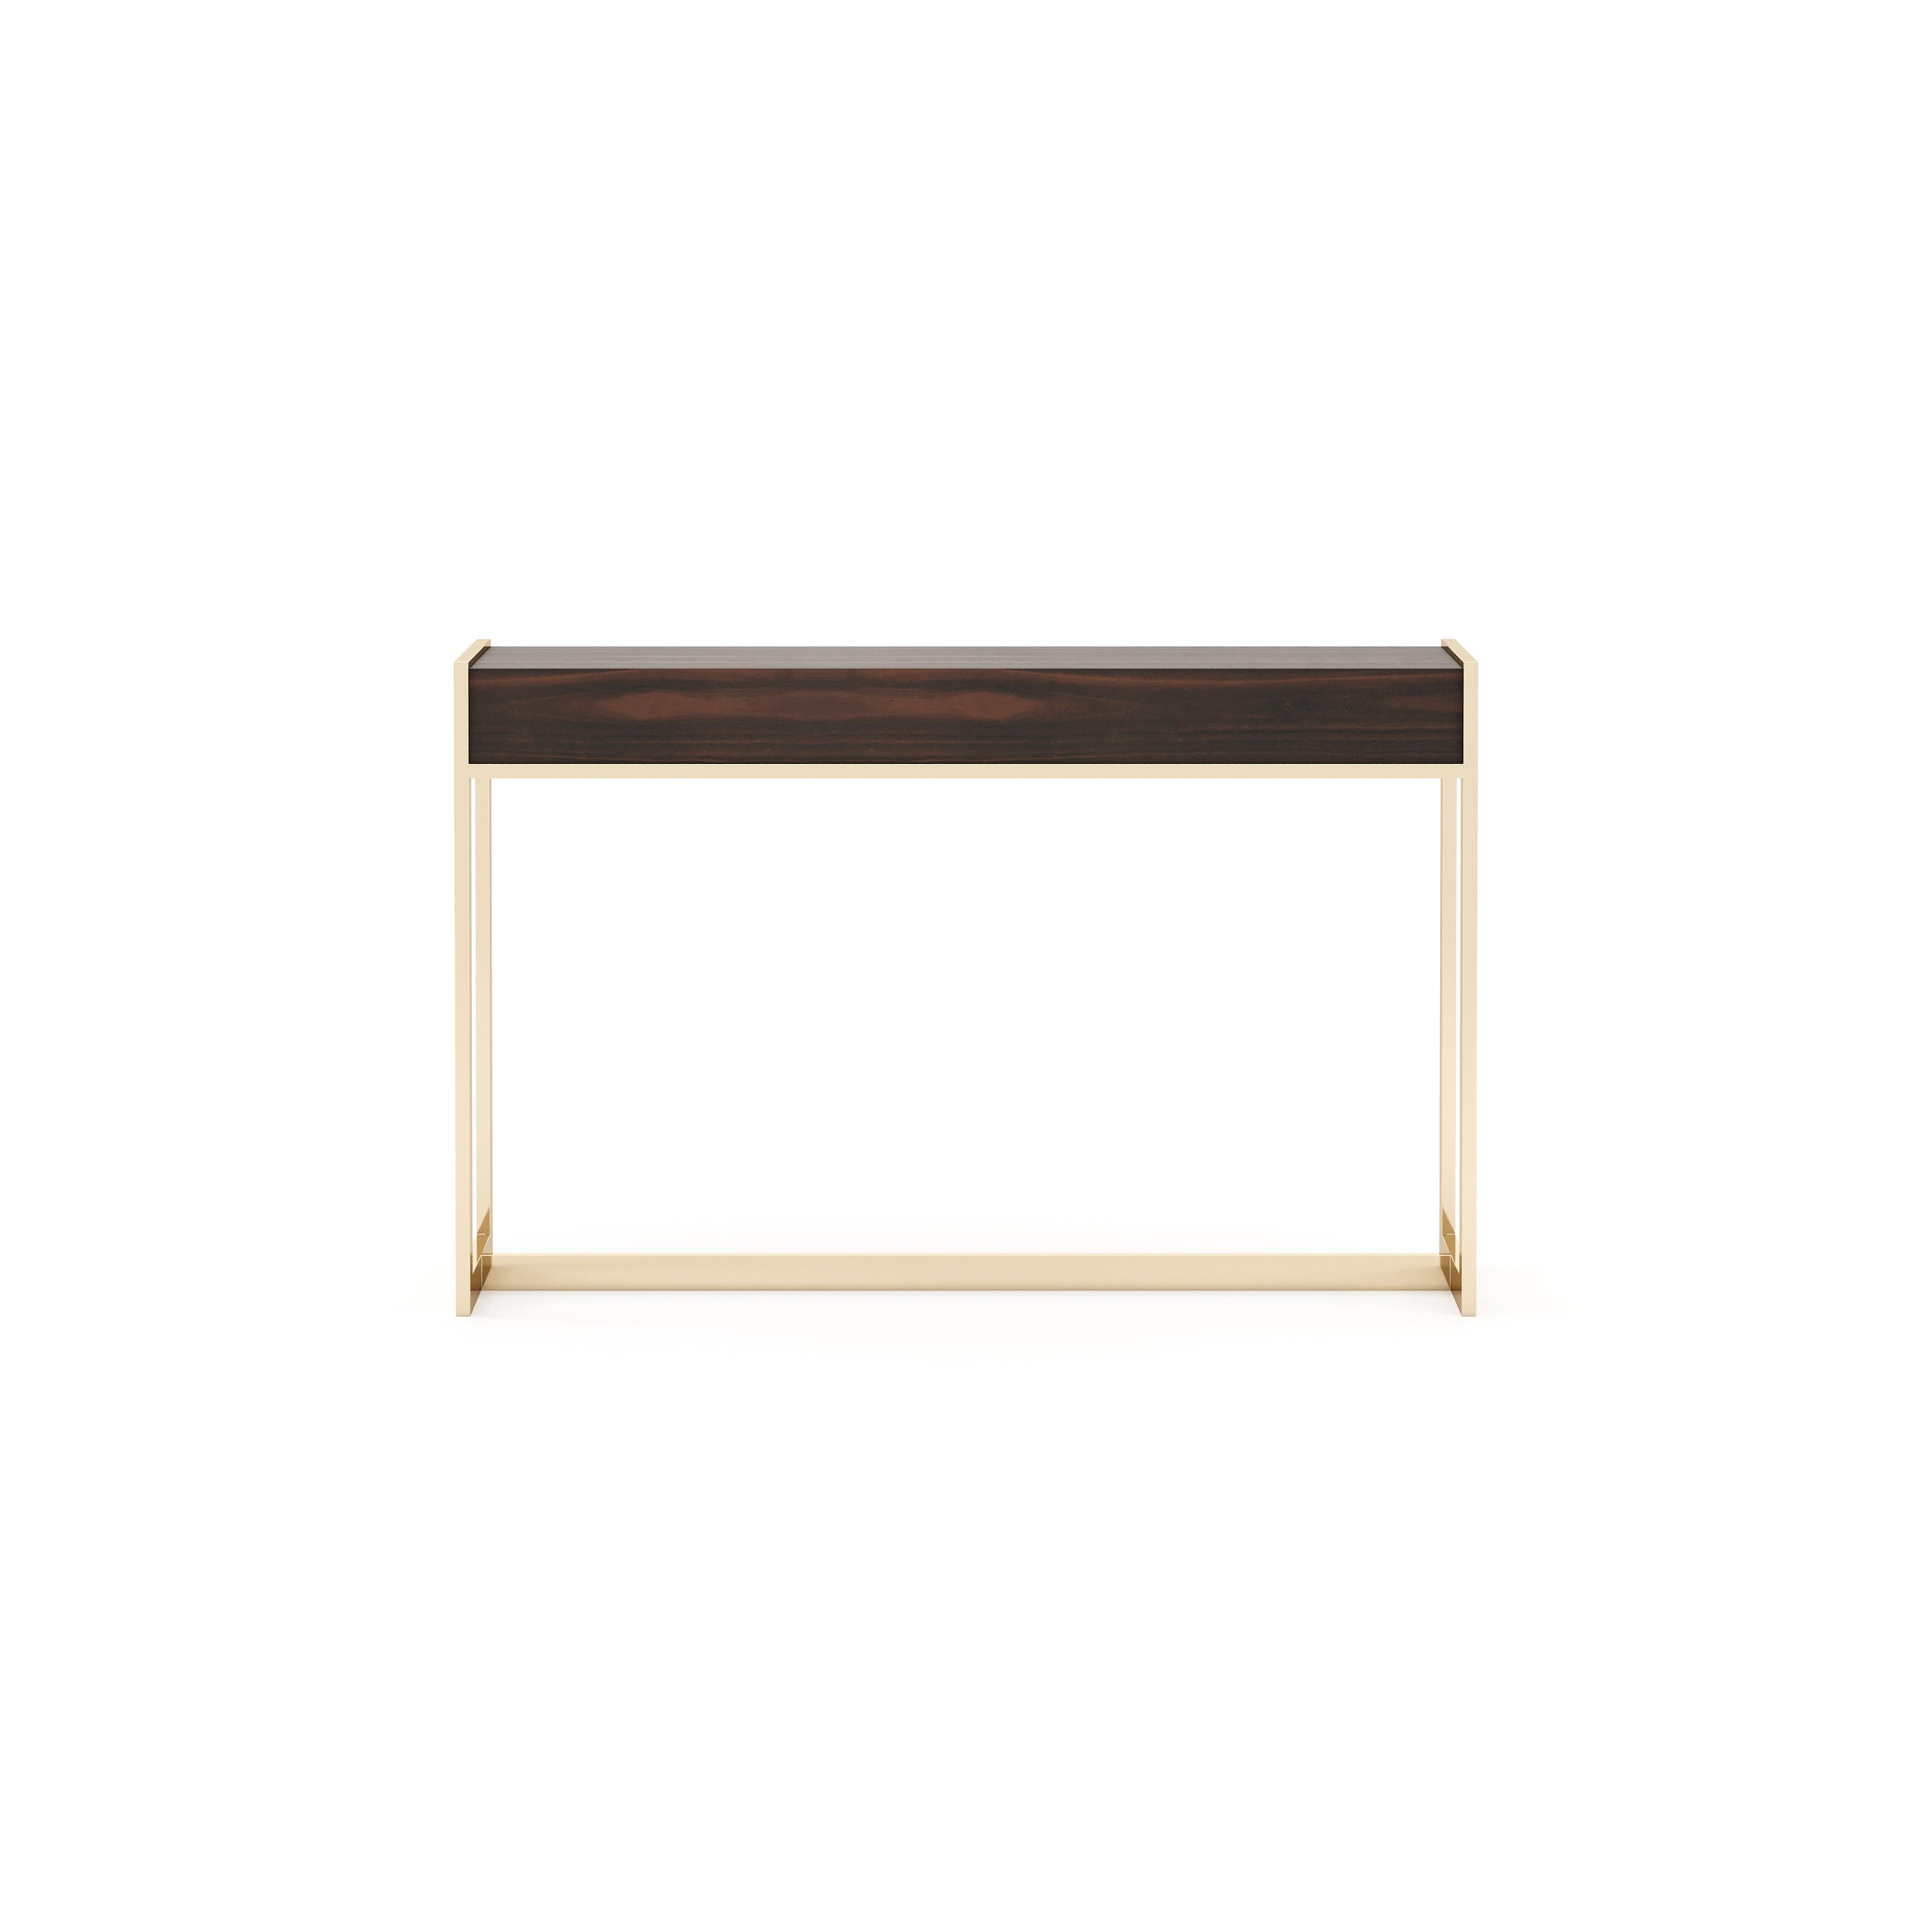 Anthony console is an impressive piece made with a wood top and complemented by gold stainless steel. The audacious top is a nice contrast to the shape of thin and rectangular feet. This is a must-have piece for living rooms and entrance halls.

*